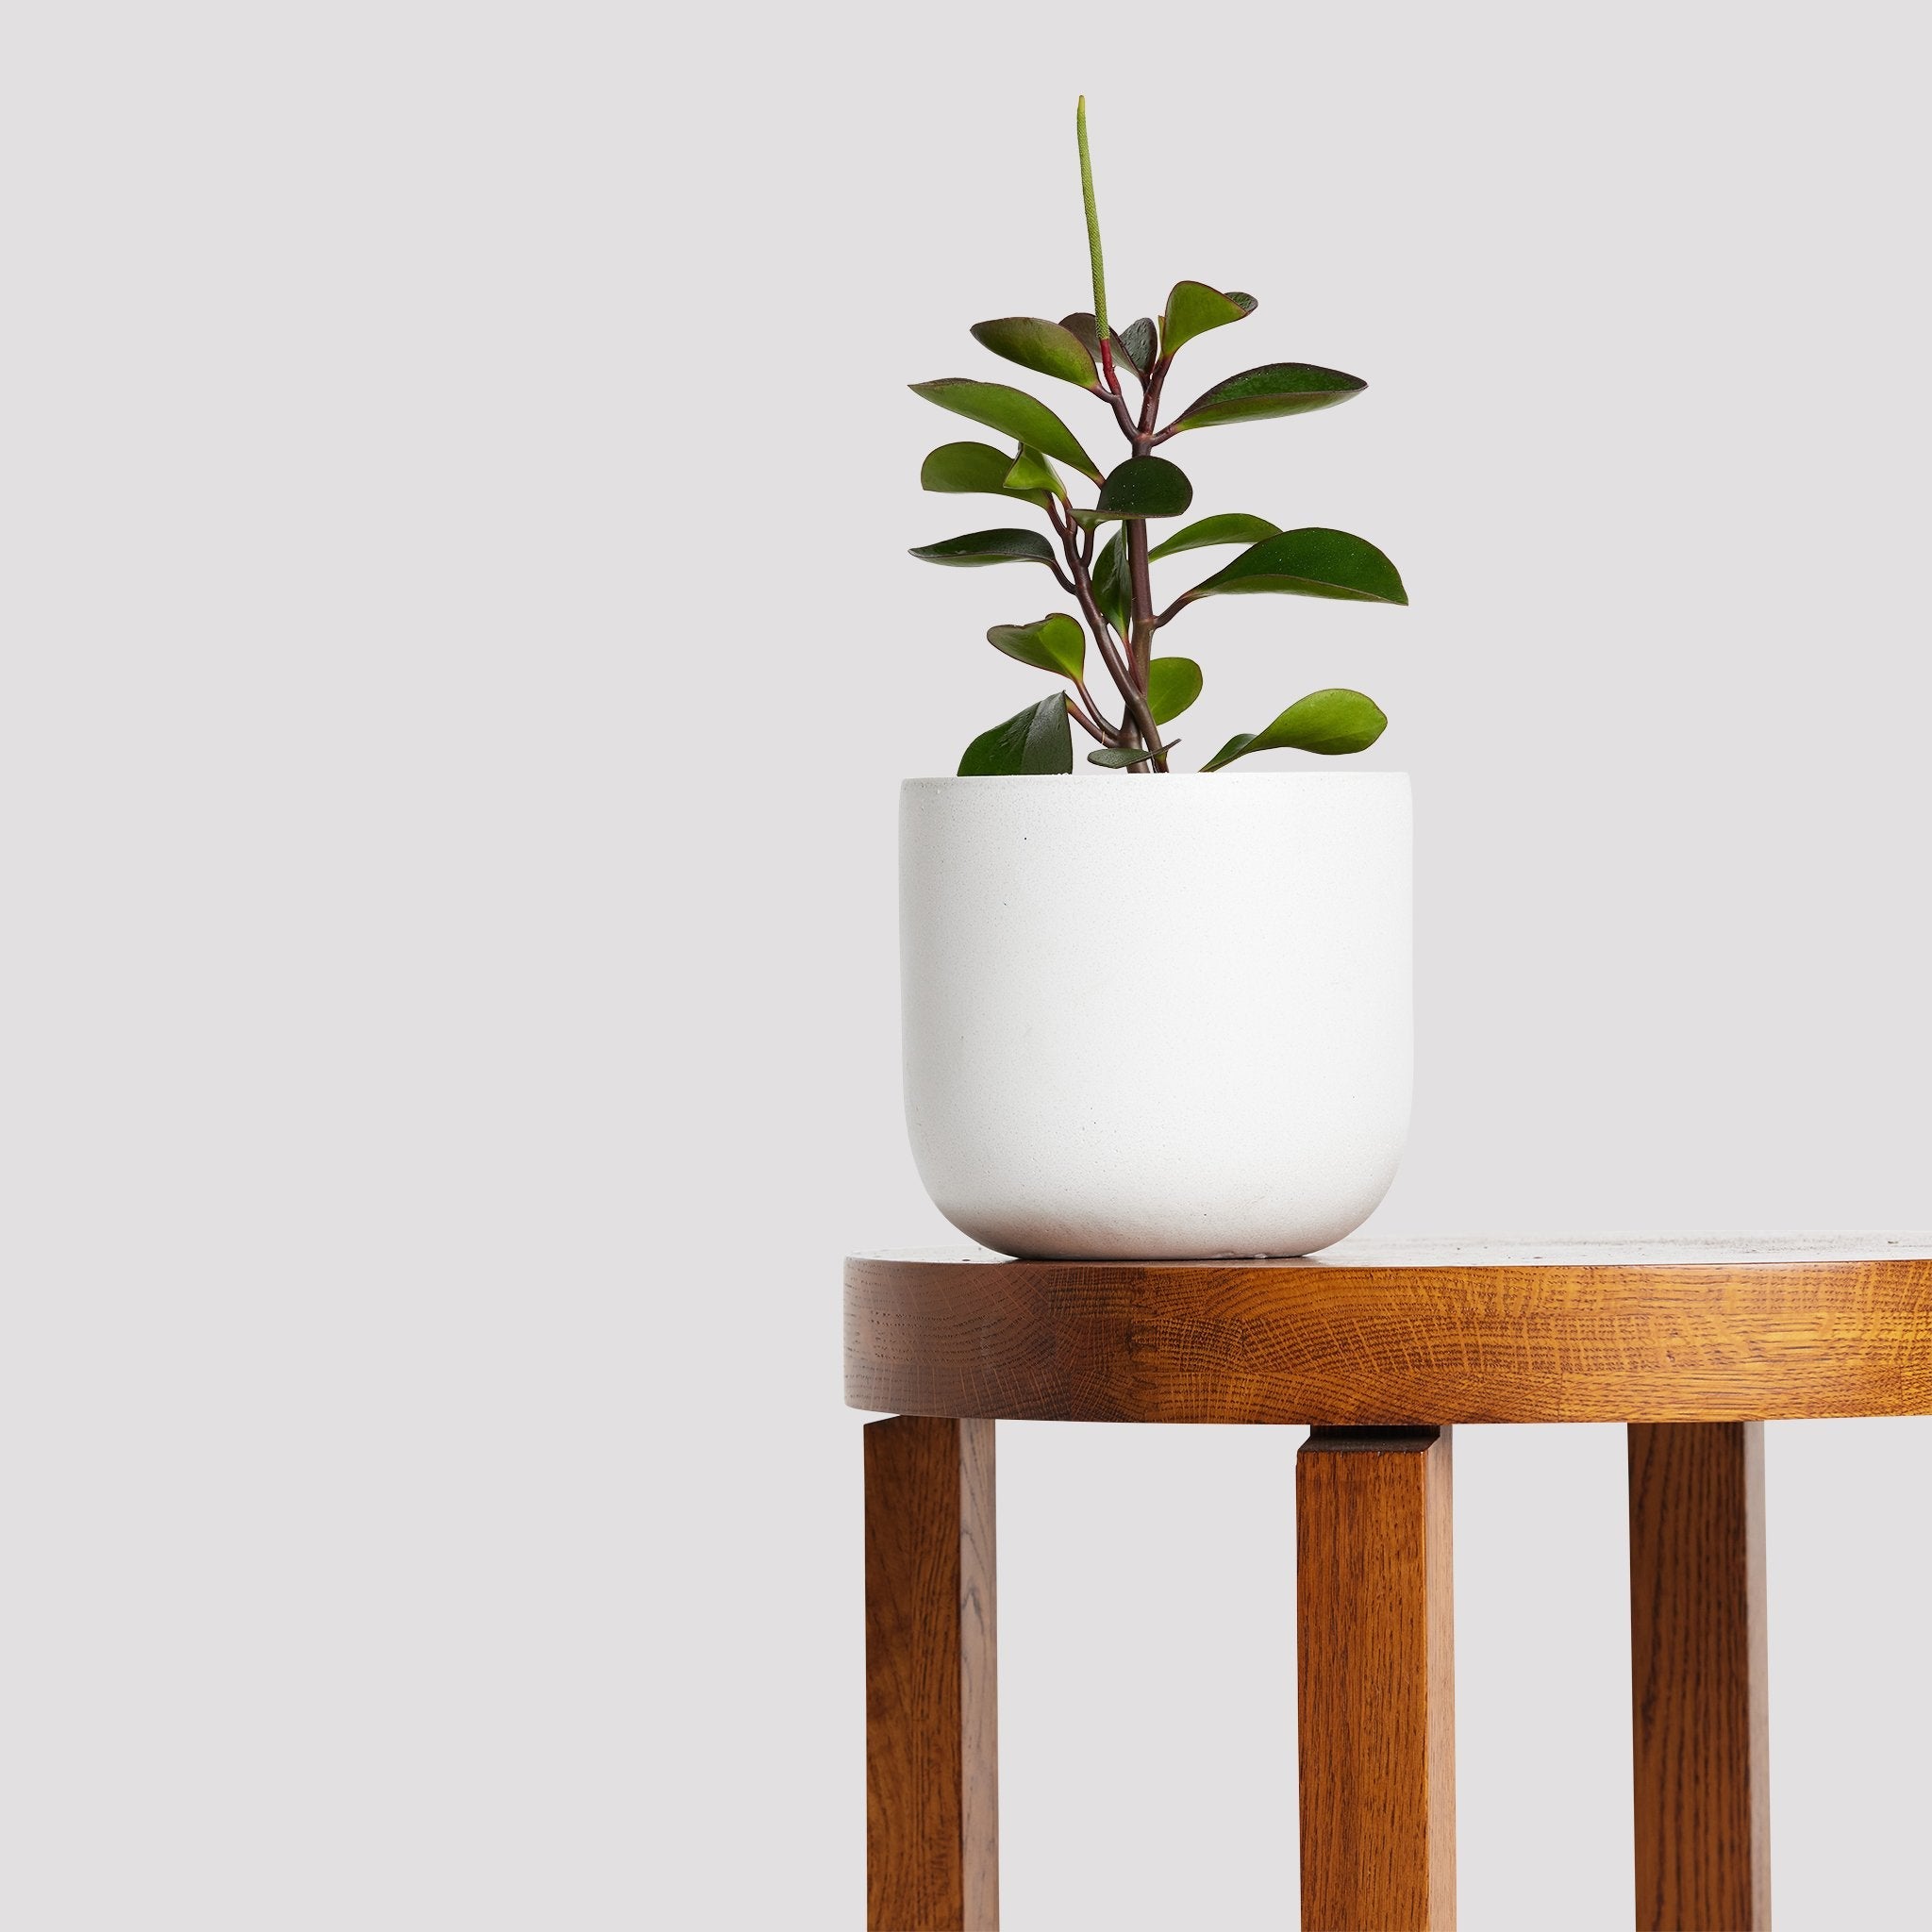 Floré Pot – White Indoor Plant with Peperomia Red Edge on Table The Good Plant Co